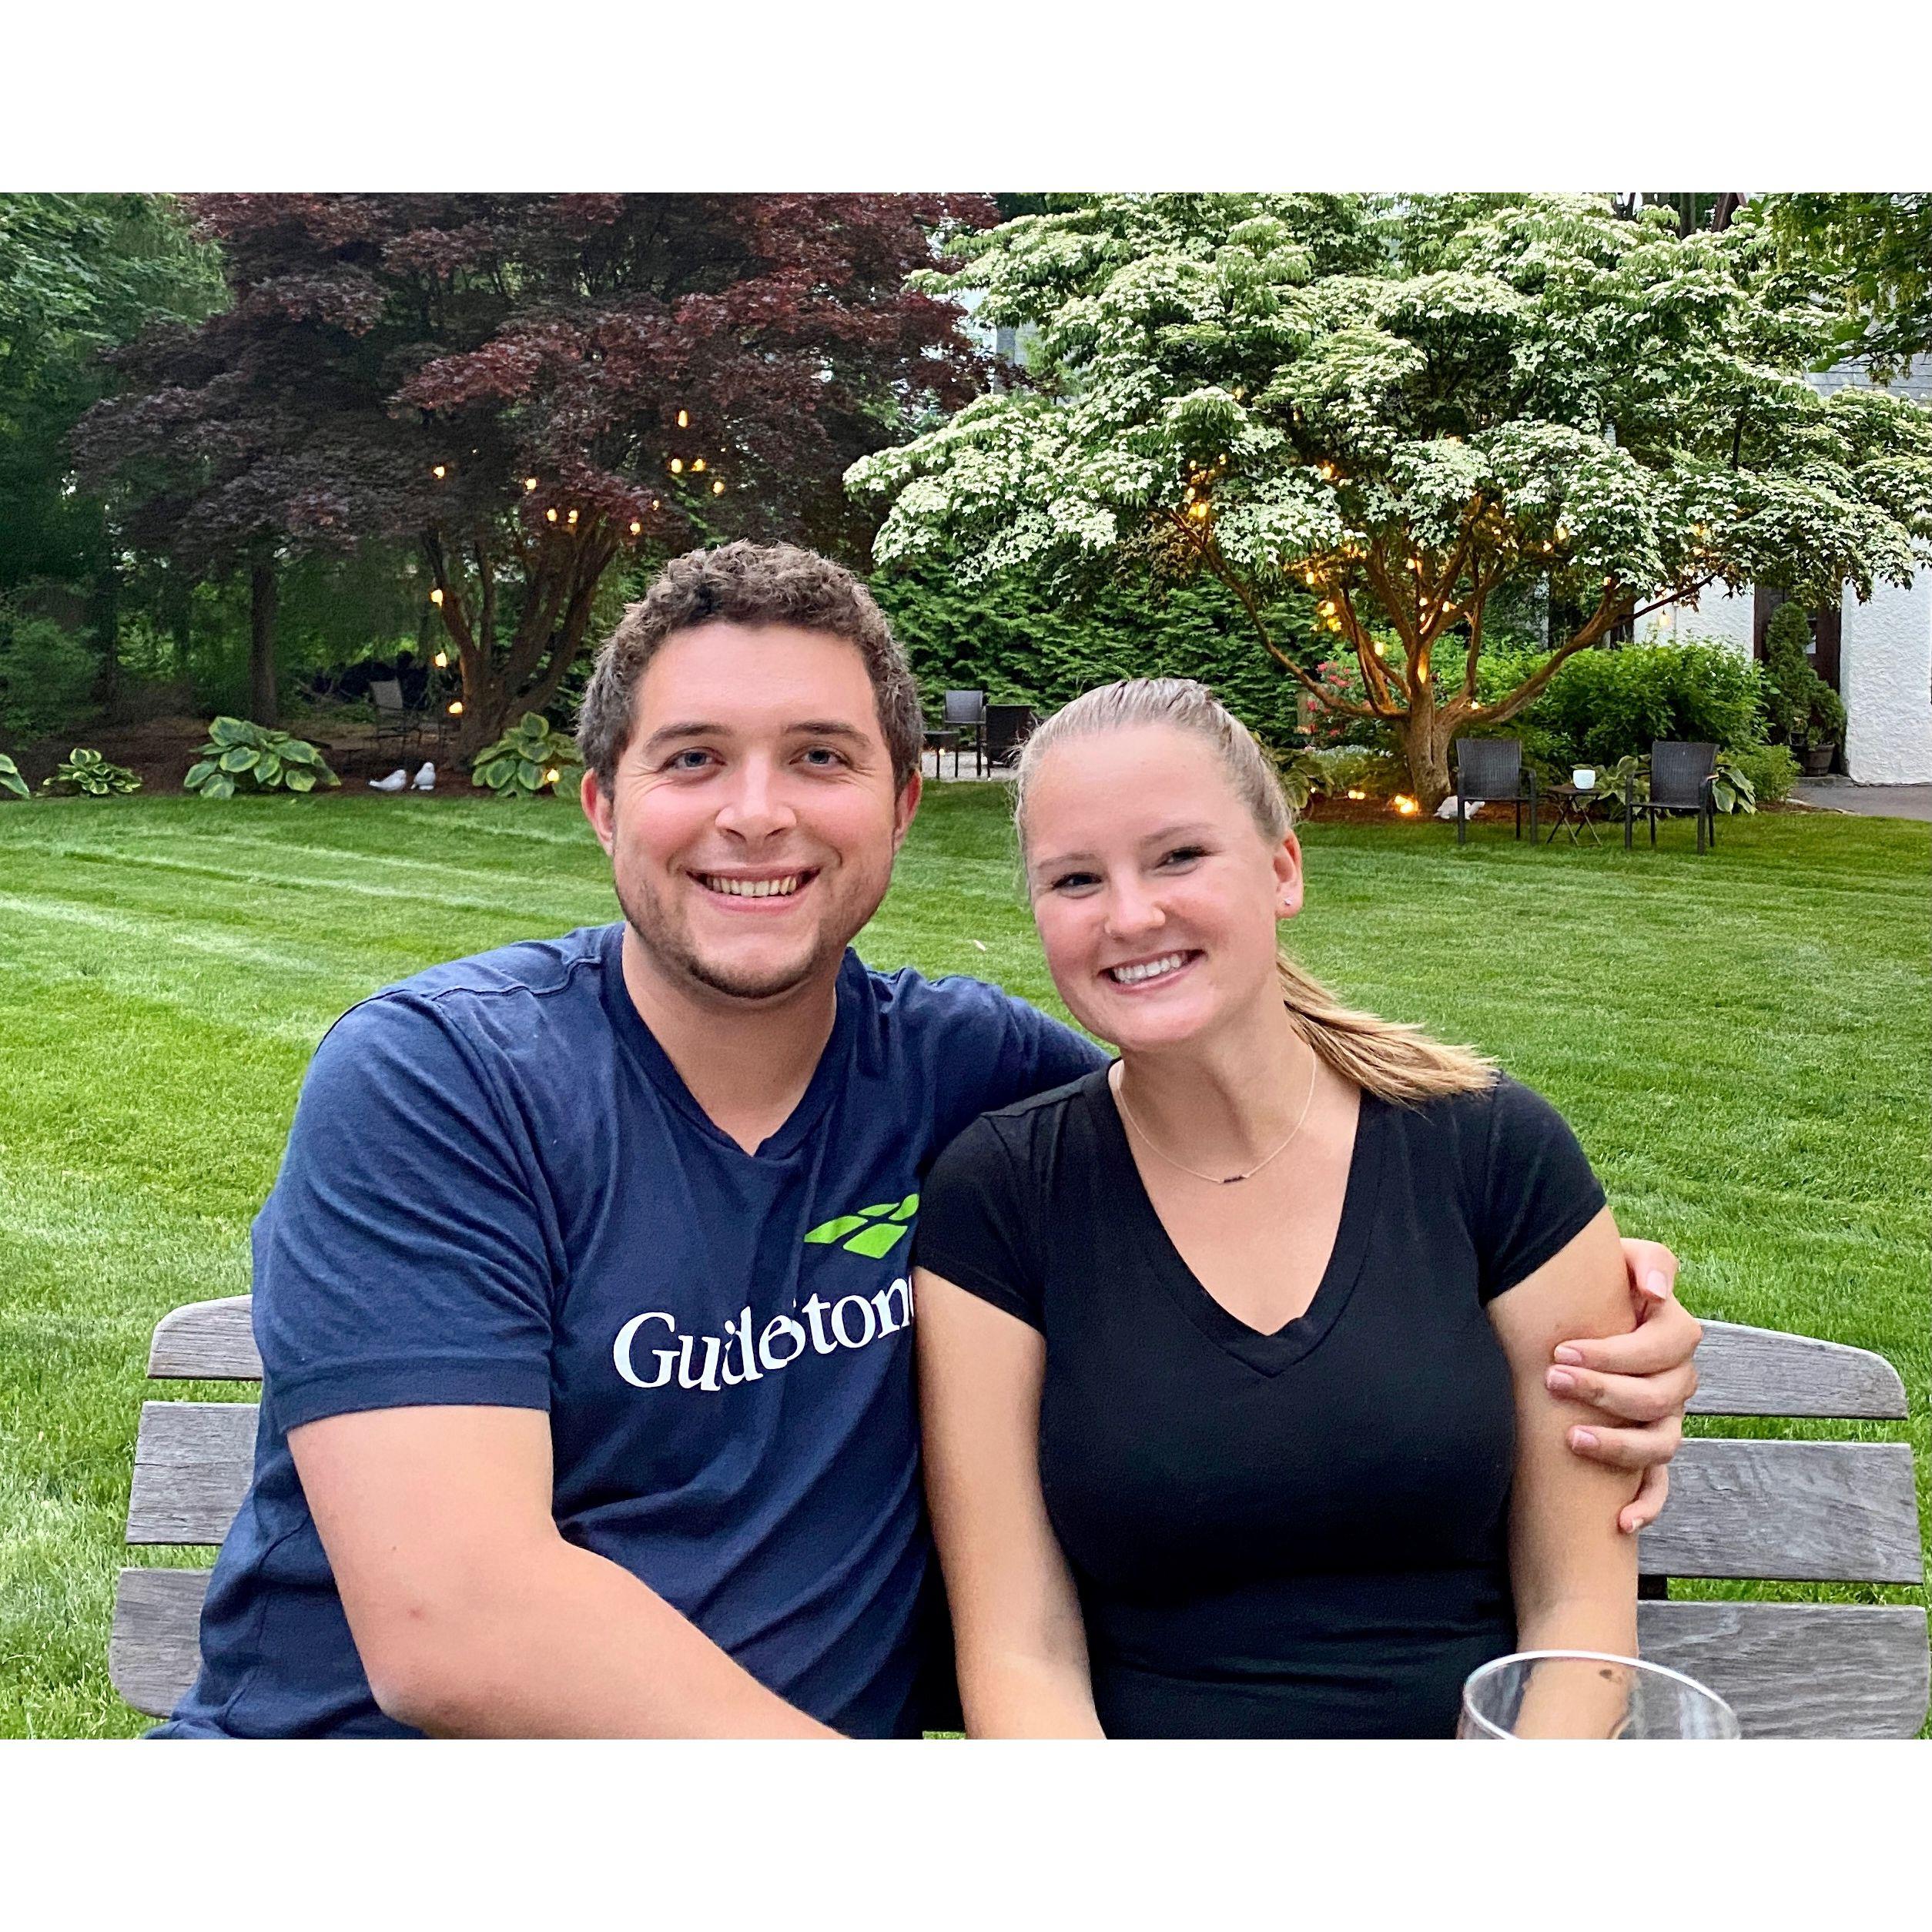 June 2021: I got to celebrate my first job offer in Connecticut with his family and friends!